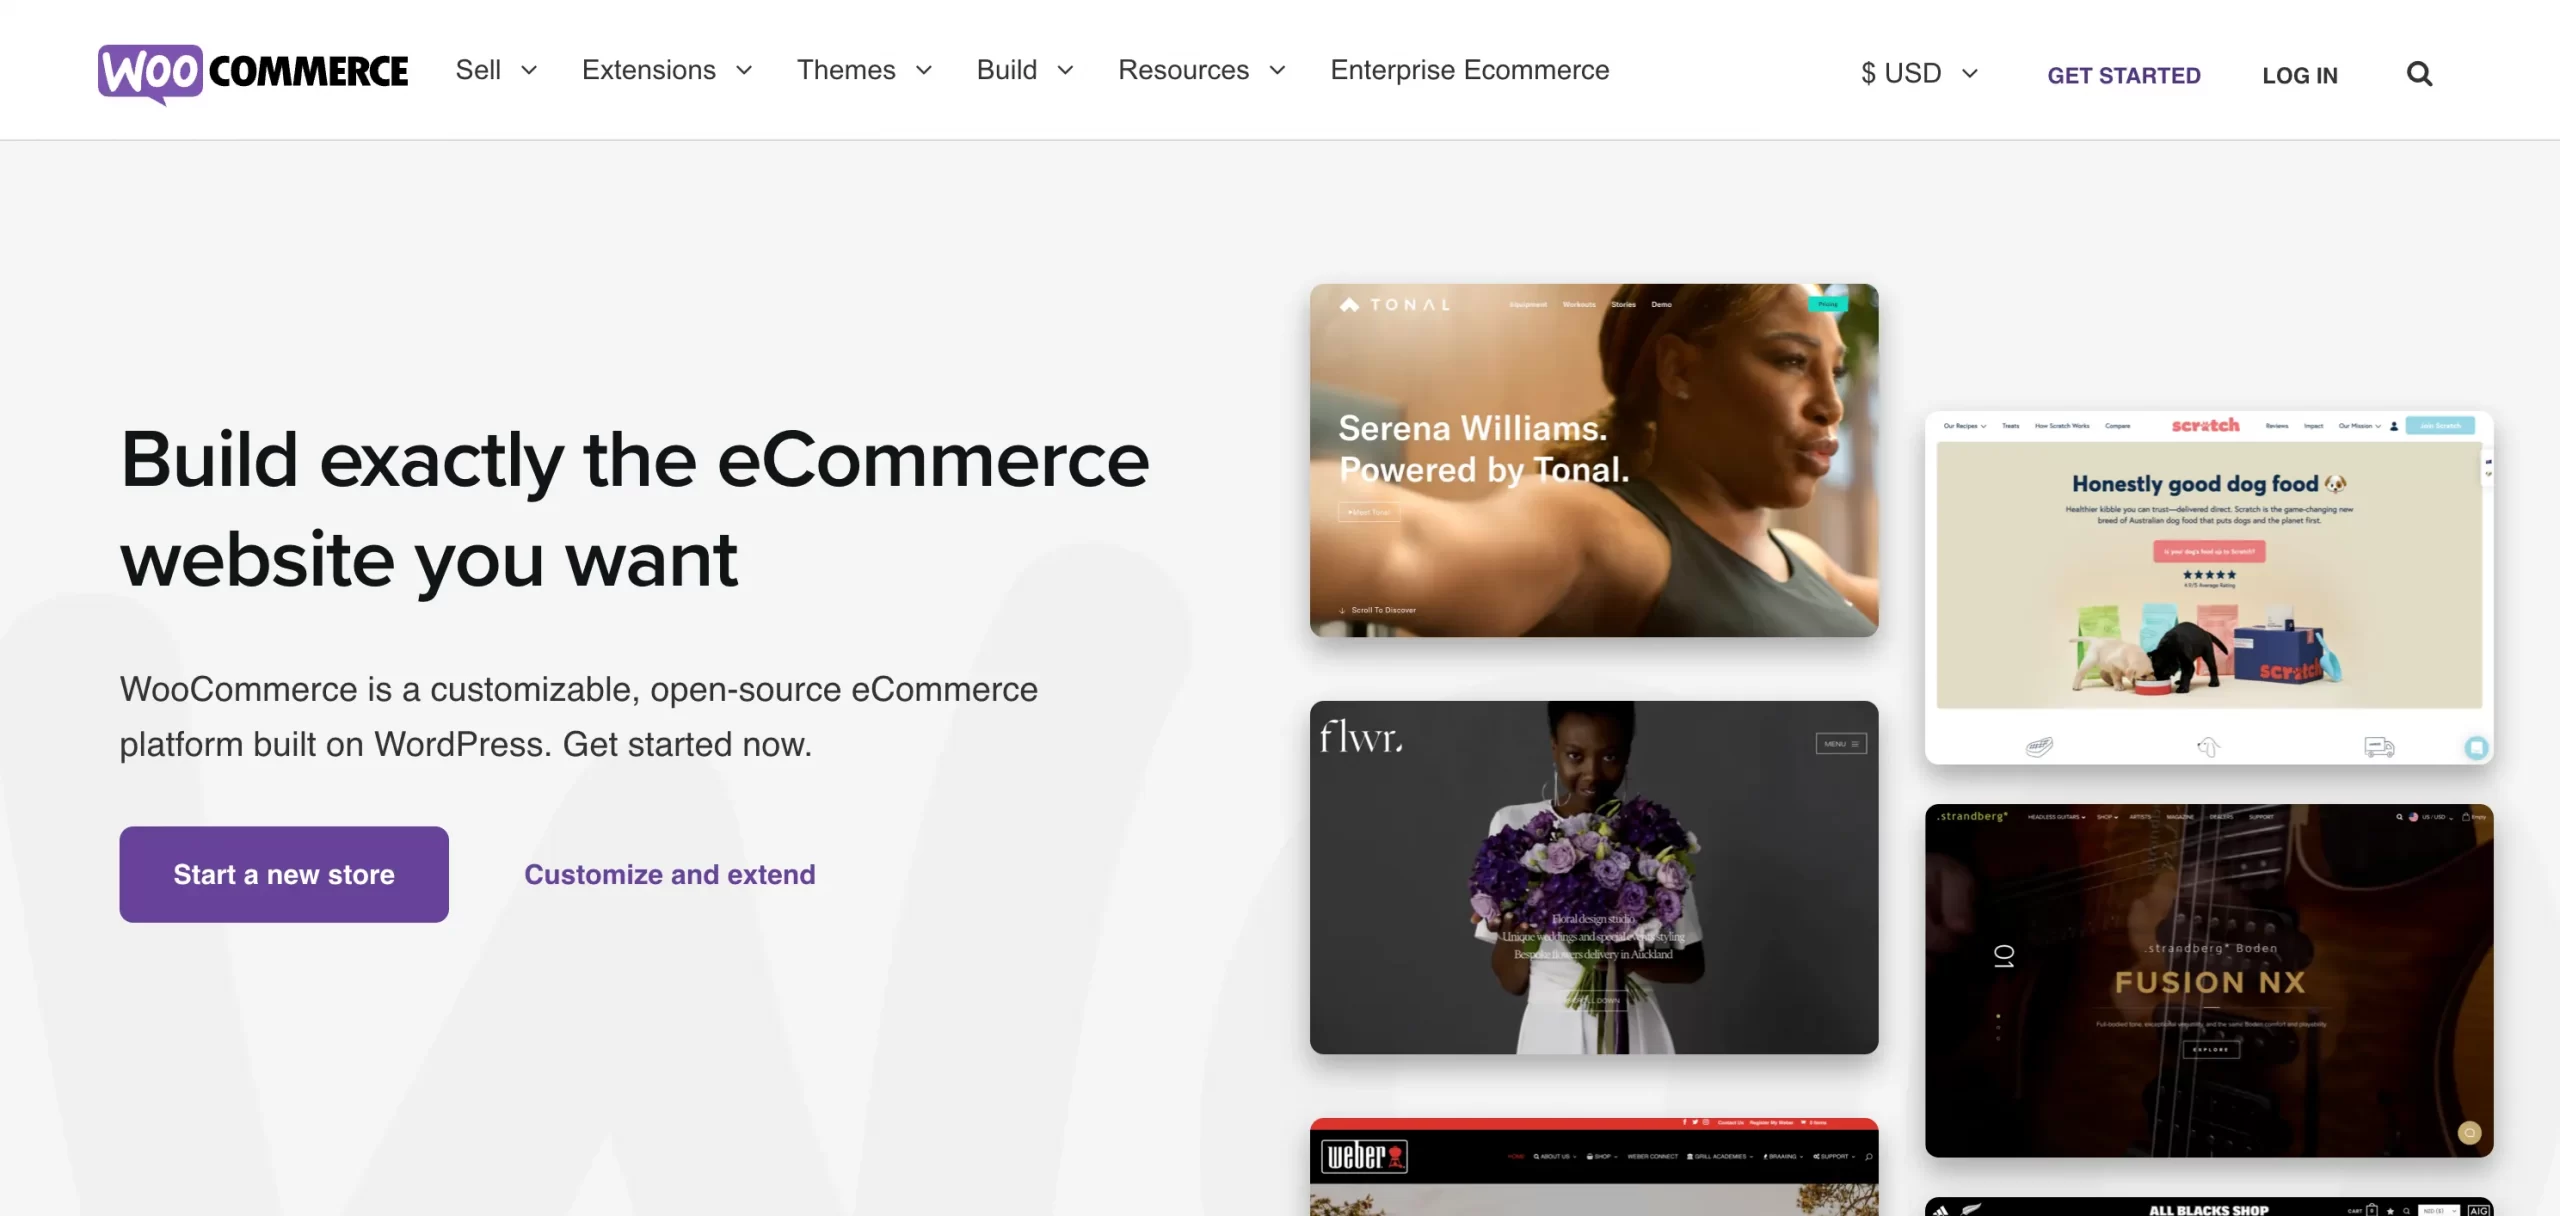 Does dropshipping still work well on WooCommerce WordPress?